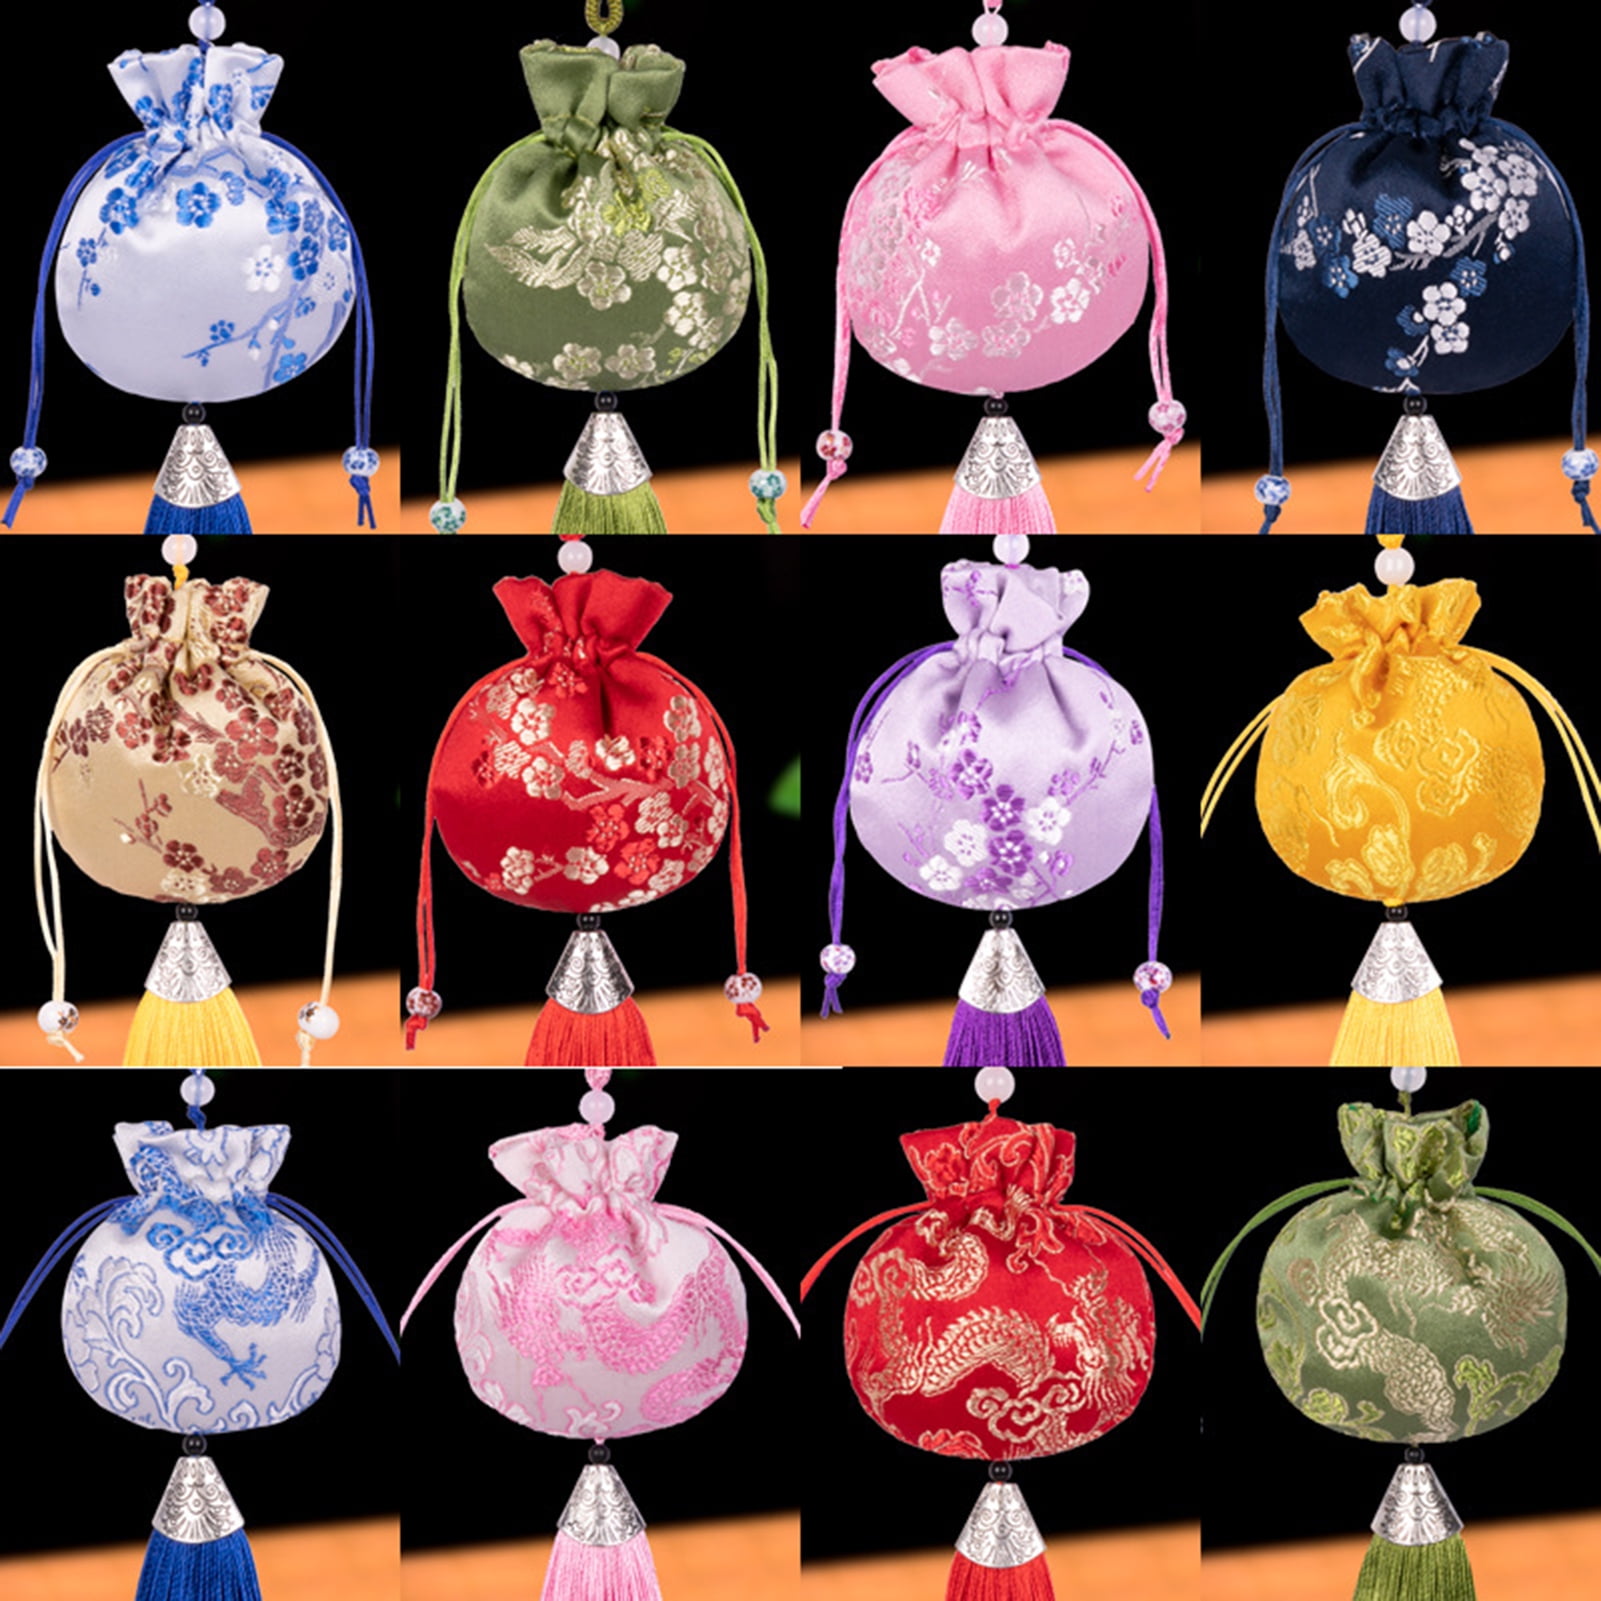 Petunny 10pcs Jewelry Bags Drawstring,Drawstring Gift Bags Small Chinese Sachet Bag Suitable for Jewelry,Coin,Candy,Ring(Random Color and Style)